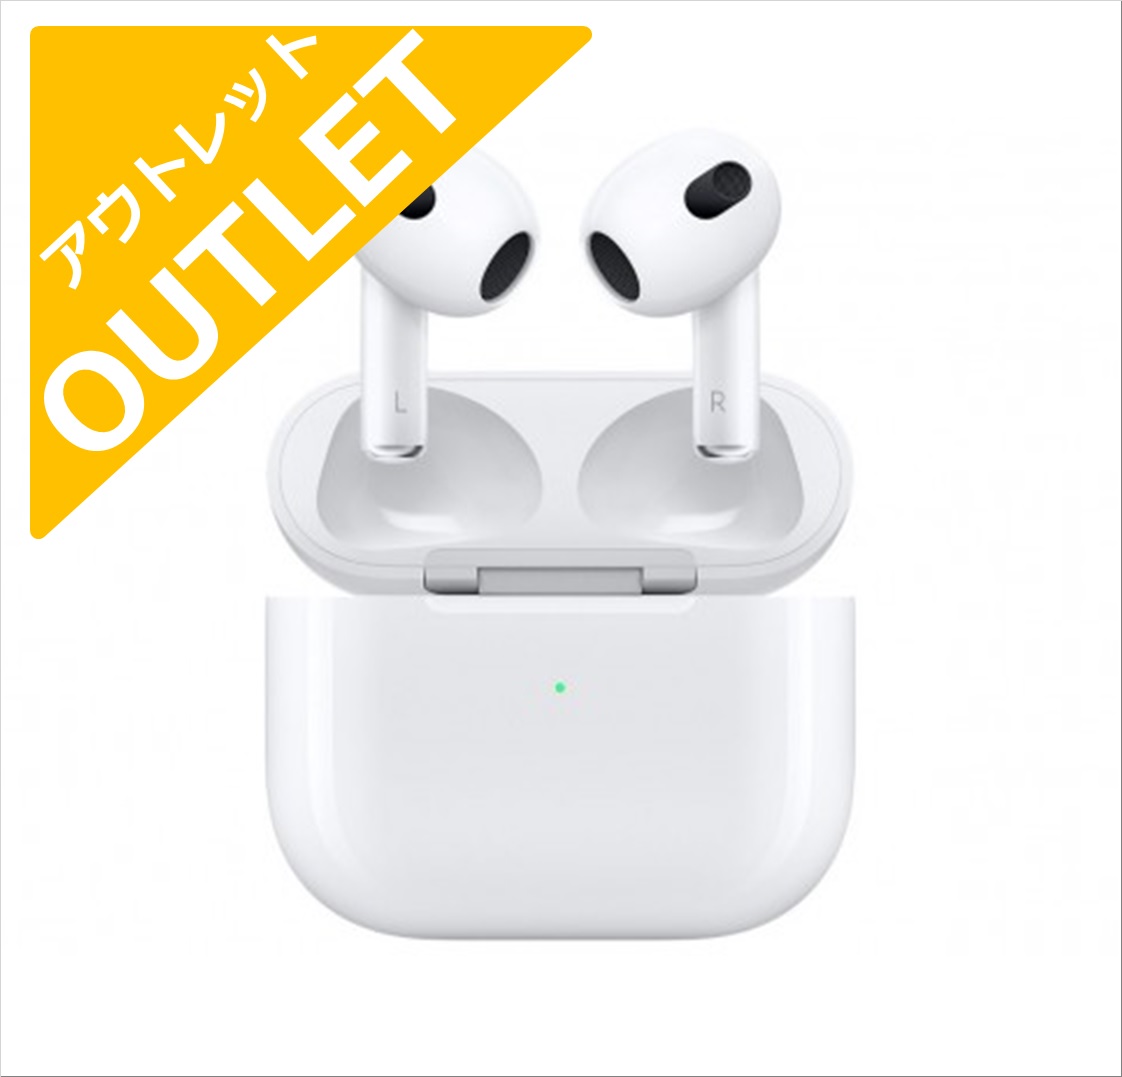 AirPods 第3世代 - イヤホン